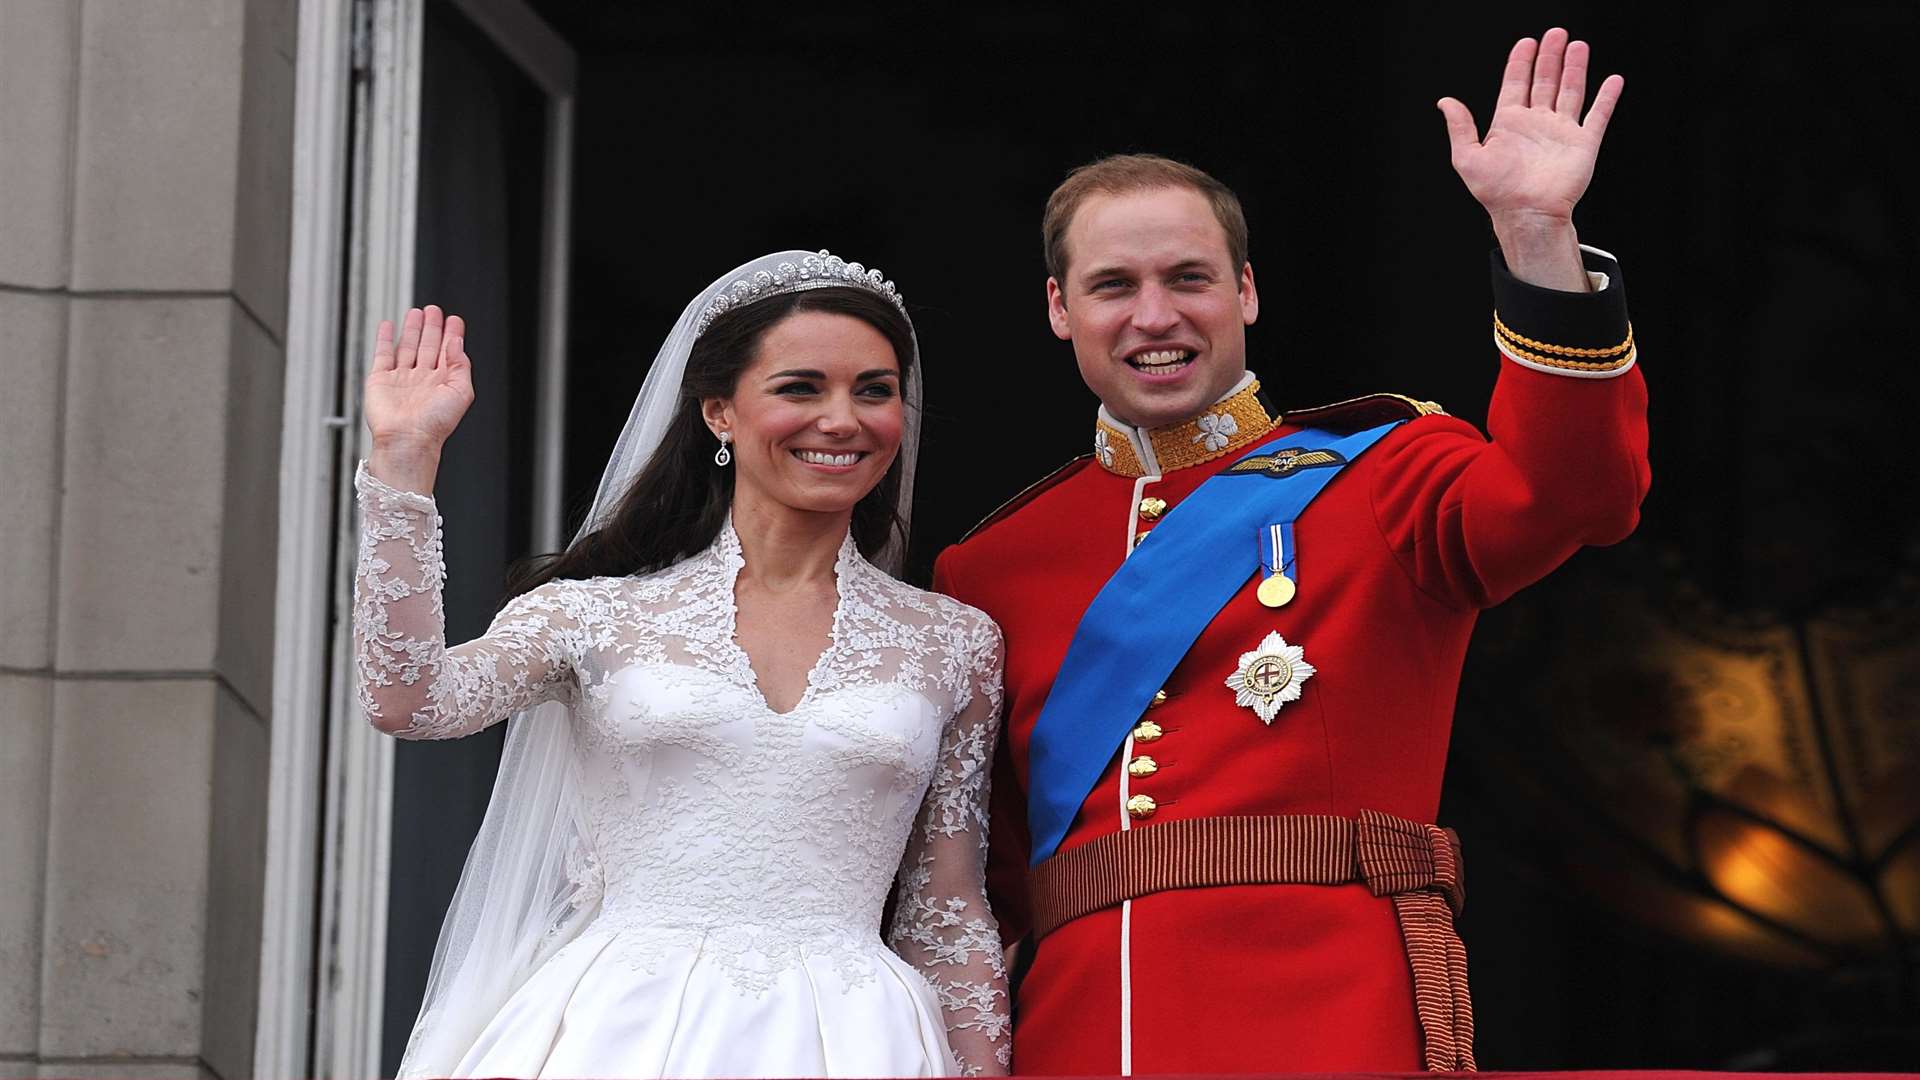 Prince Harry's brother Prince William and Catherine, Duchess of Cambridge, who were married at Westminster Abbey in 2011, said they were "very excited for Harry and Meghan".